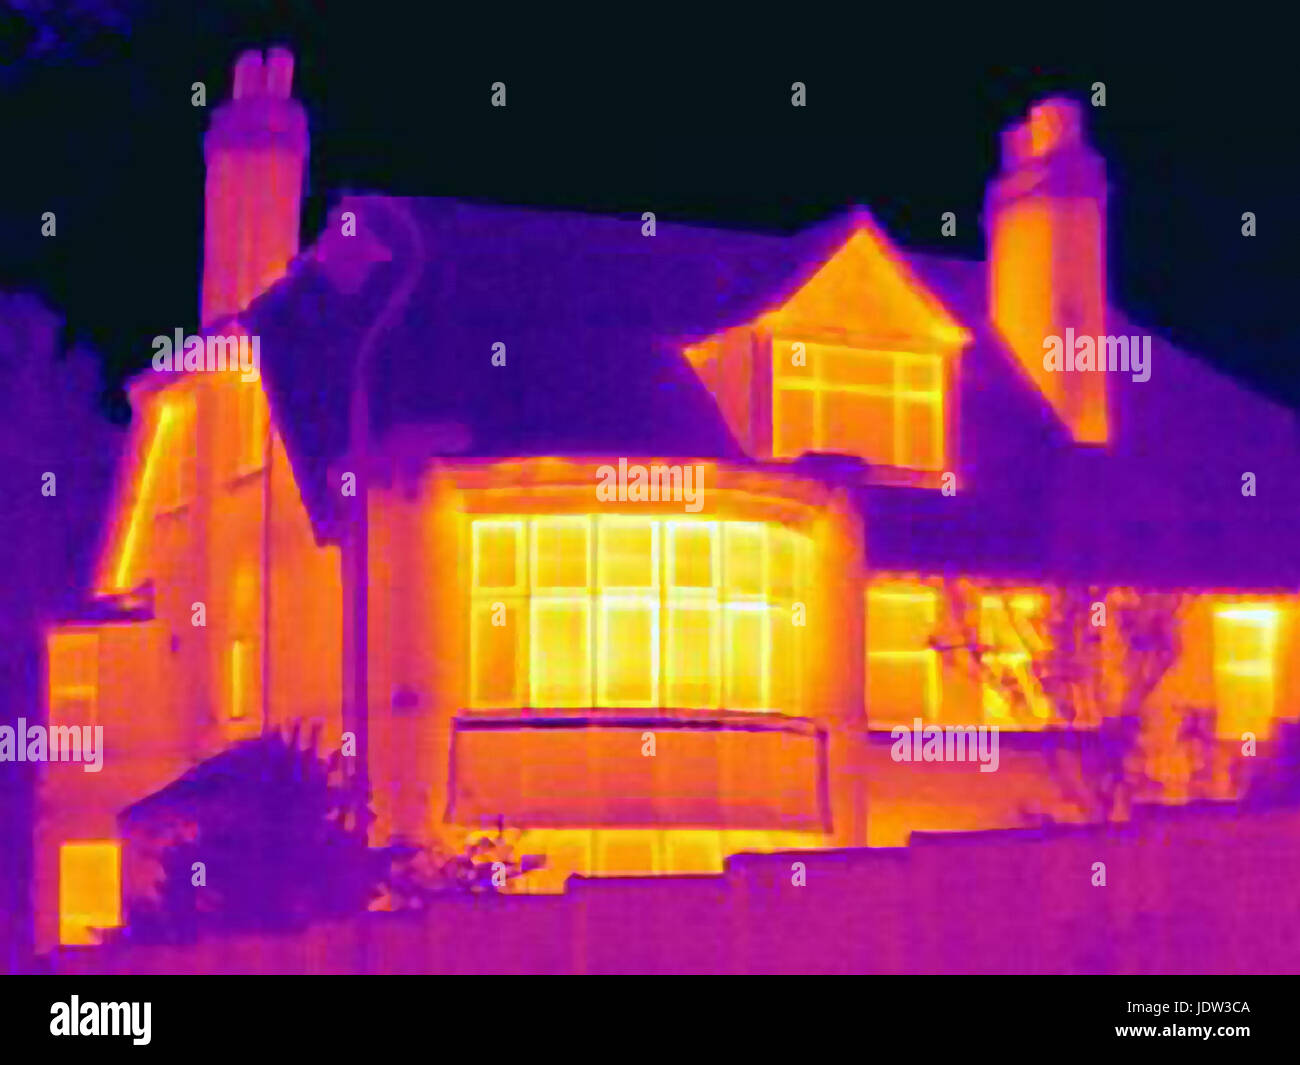 Thermal image of house on city street Stock Photo